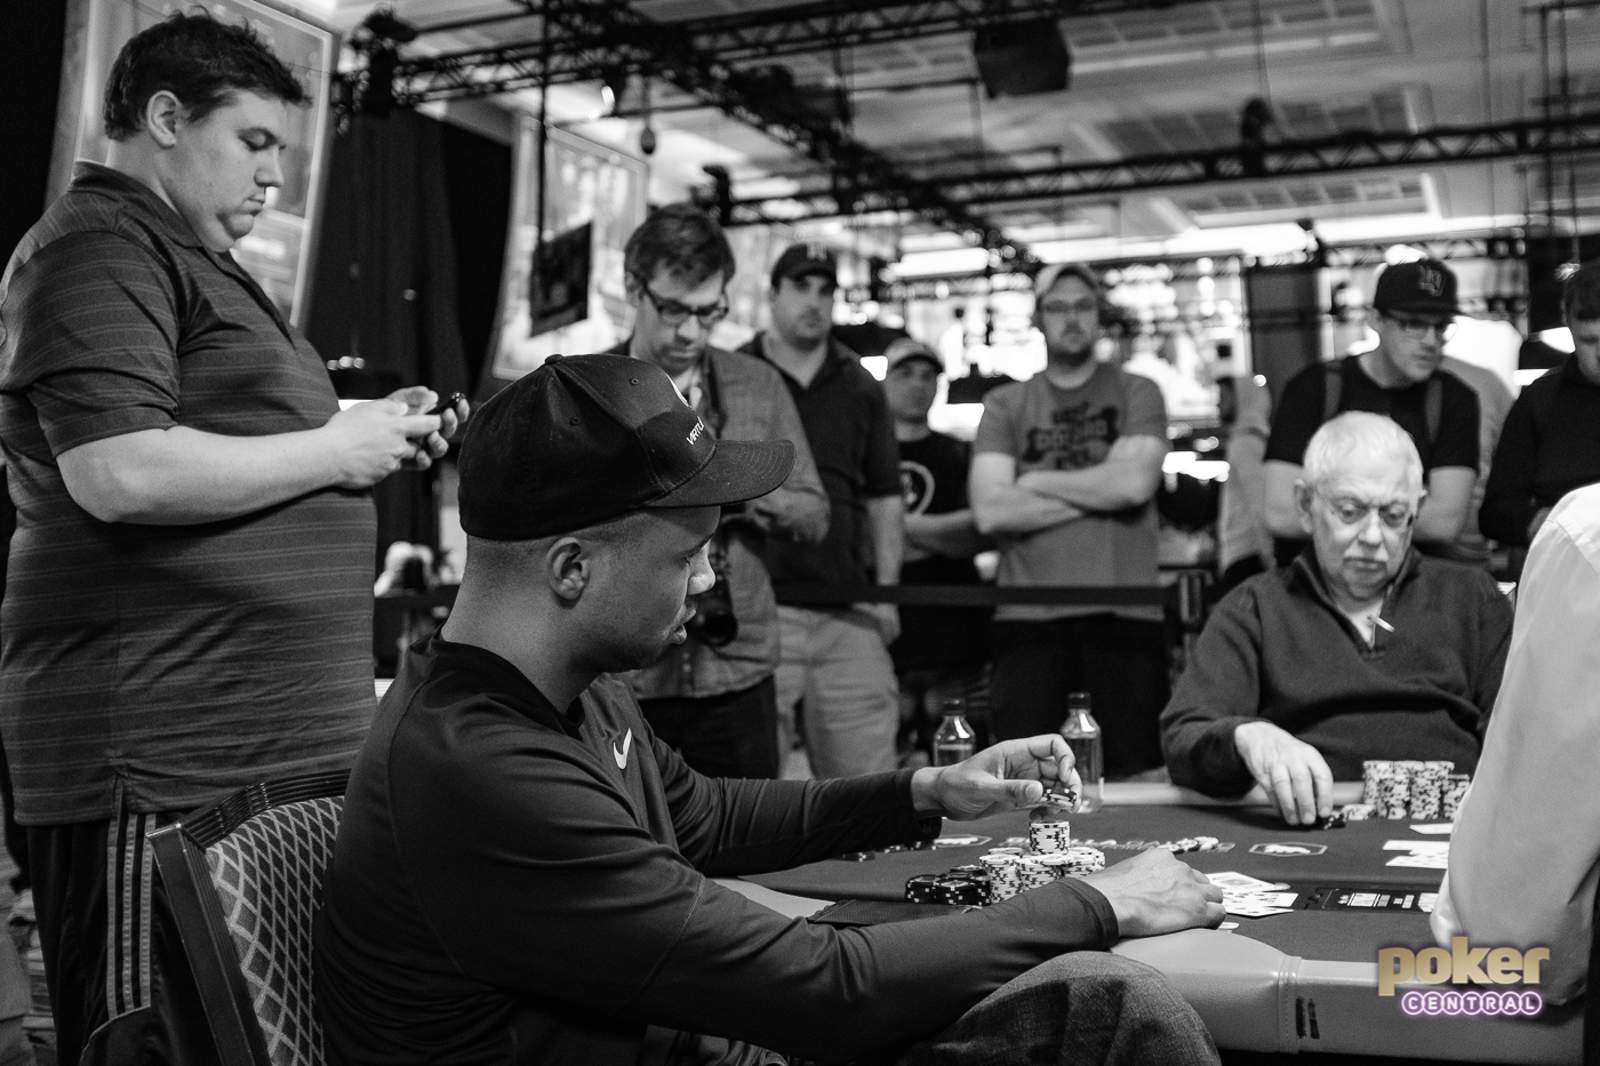 WSOP Report Day #29 - Phil Ivey Leads Final 12 in Poker Players Championship, Andre Akkari Dominating Razz